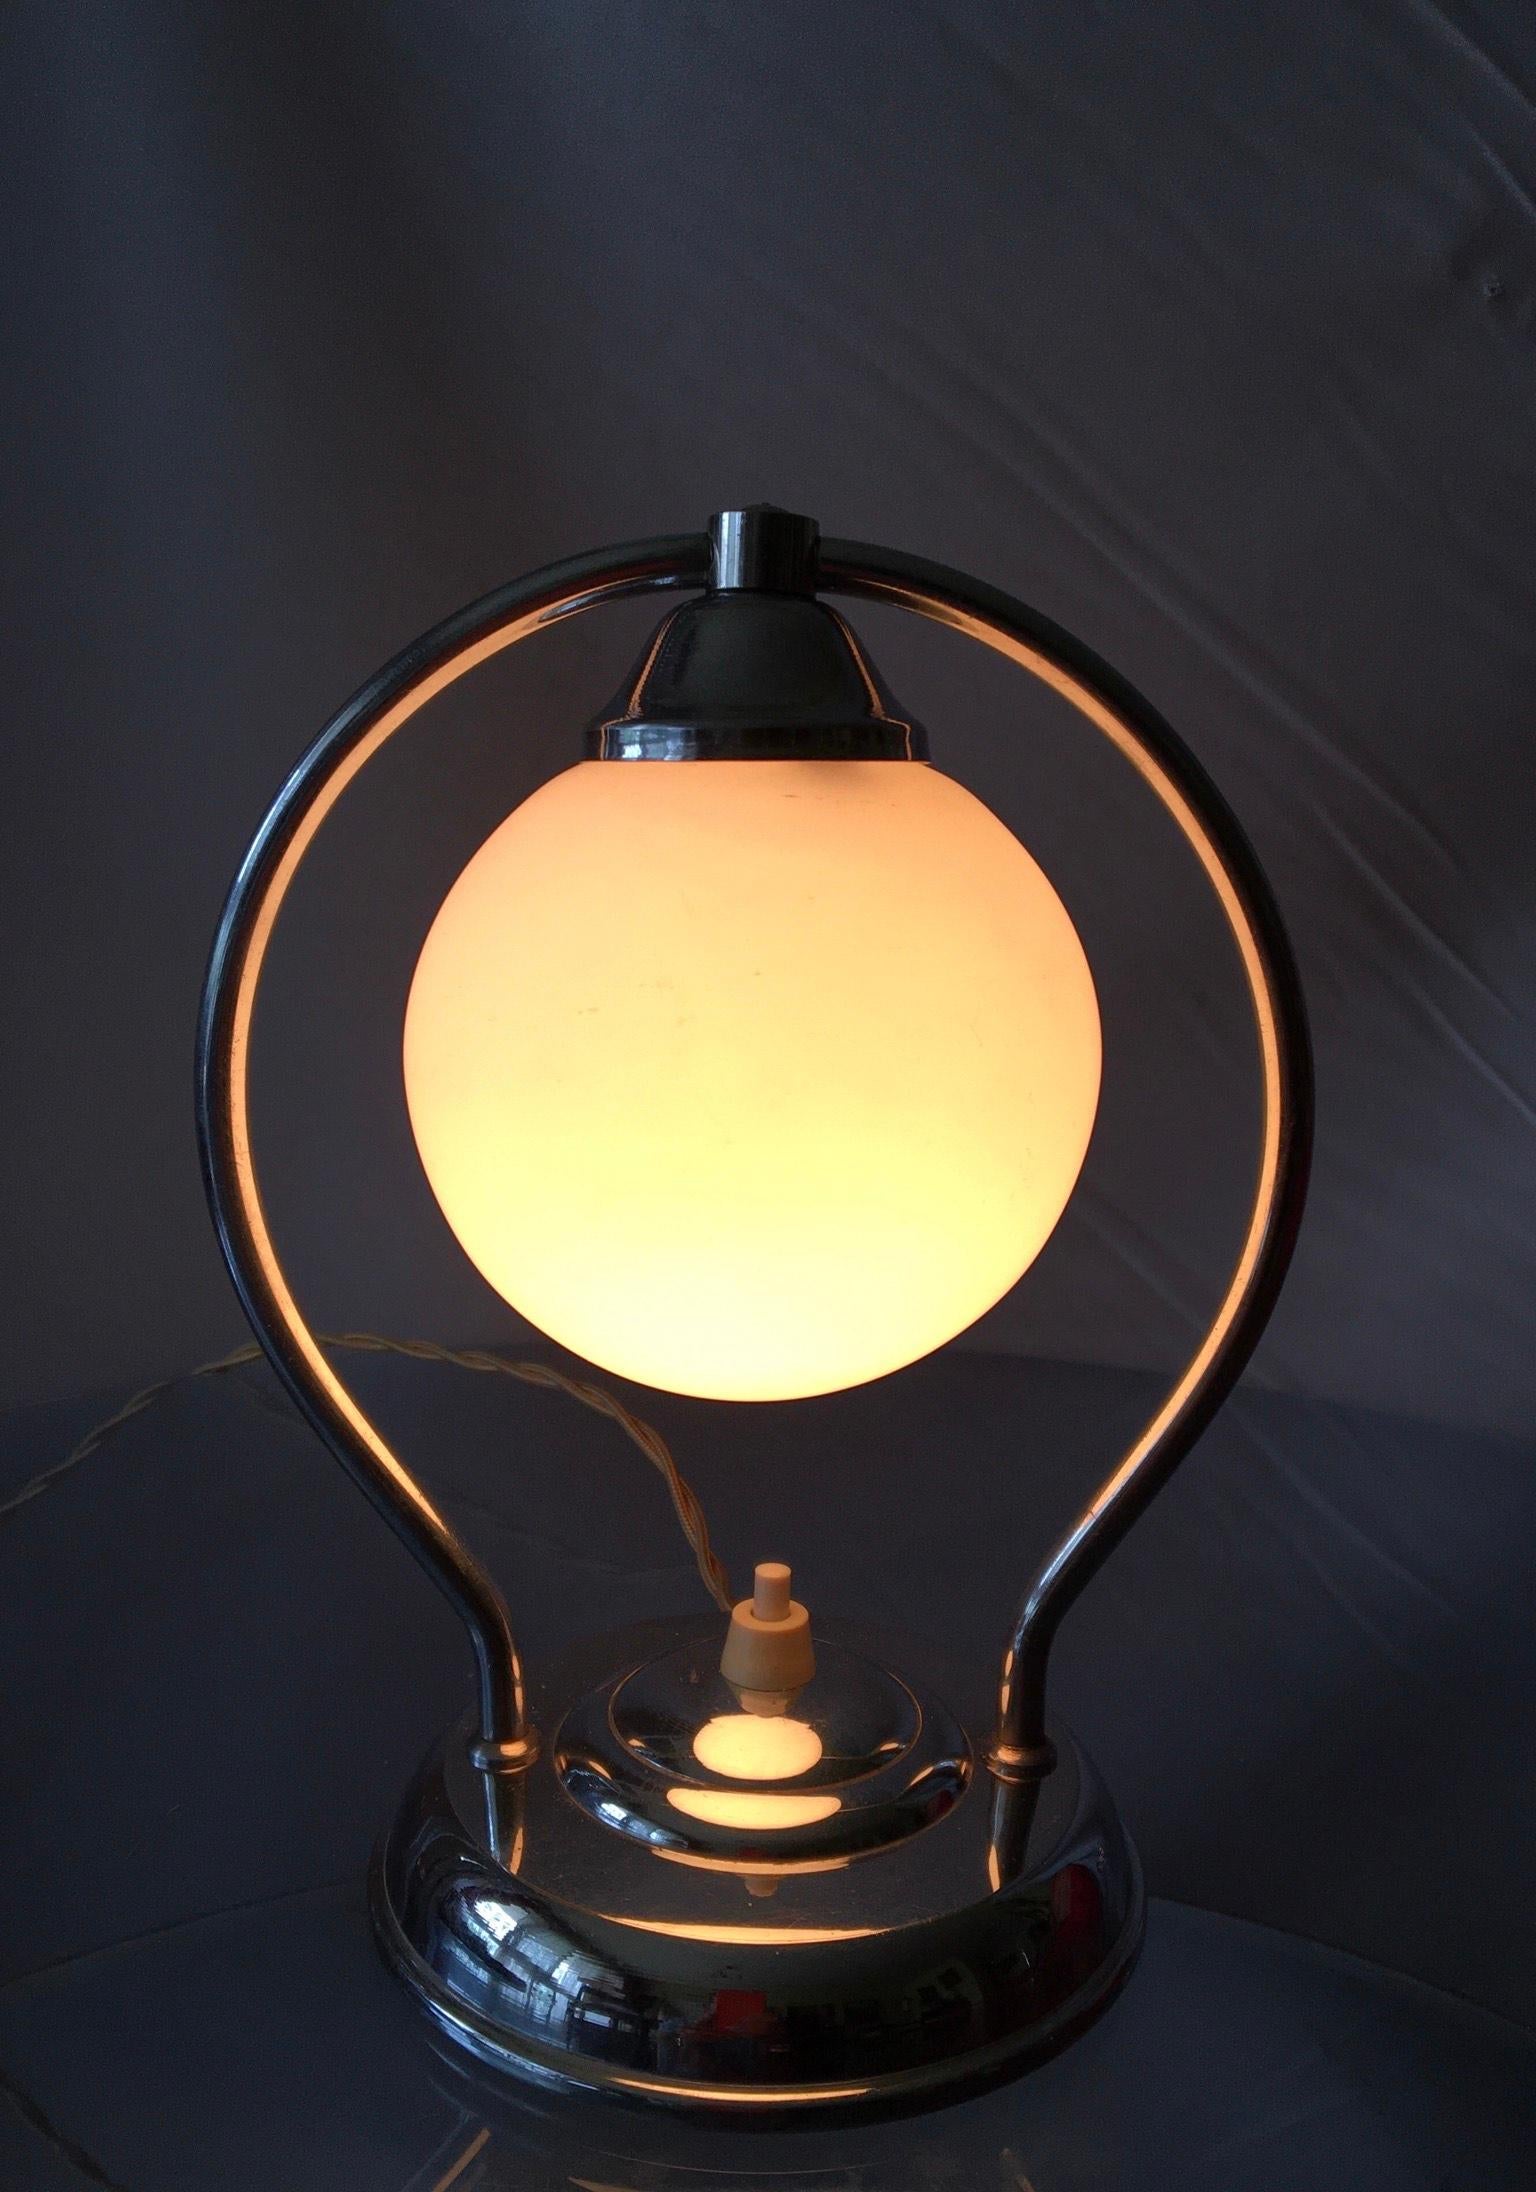 Beautiful and rare French Art Deco Modernist style lamp of the 30’s in chrome plated brass with opaline globe white mat.
The lamp is in an excellent condition, electrical parts checked, switch on/off changed, and rewired with old-fashioned braided